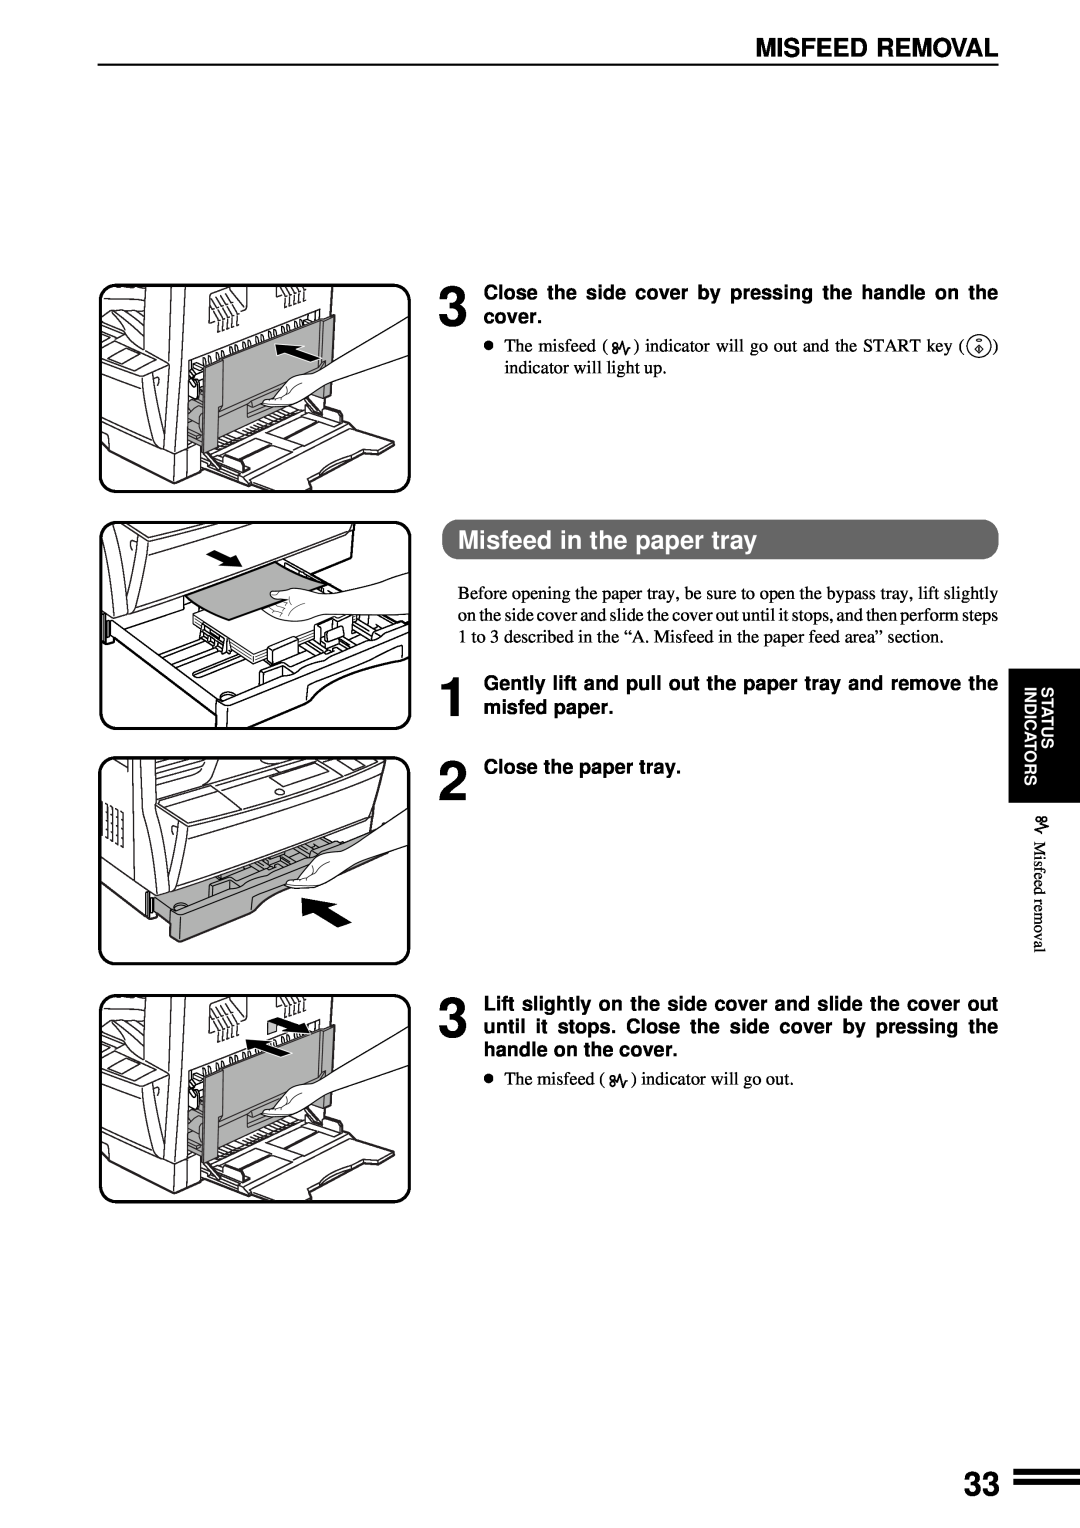 Sharp AR-163 Misfeed in the paper tray, Close the side cover by pressing the handle on the 3 cover, Close the paper tray 